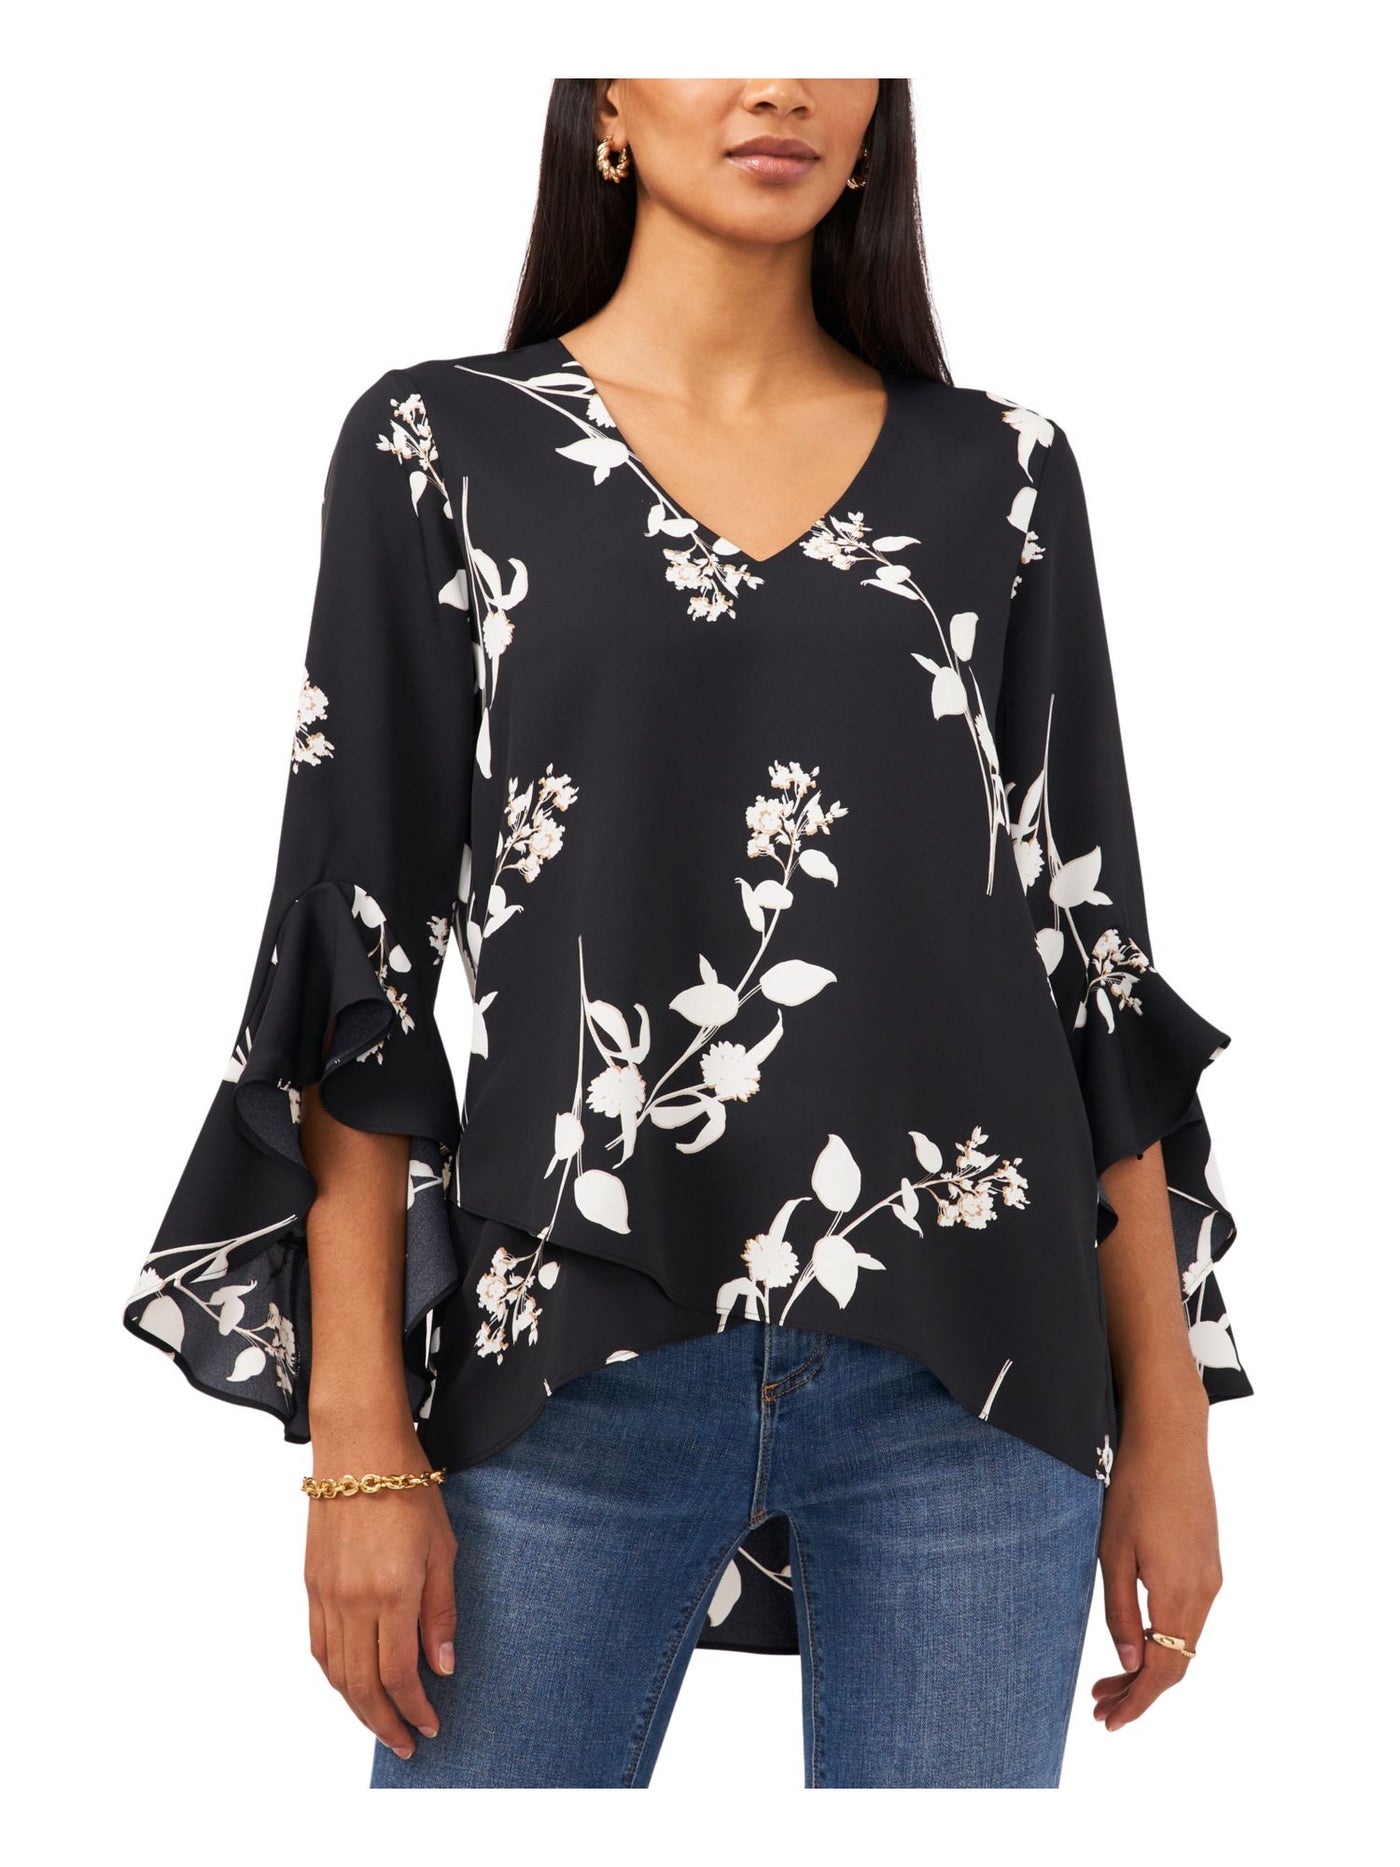 VINCE CAMUTO Womens Black Ruffled Asymmetrical Hem And Cuffs Floral Flutter Sleeve V Neck Blouse XS